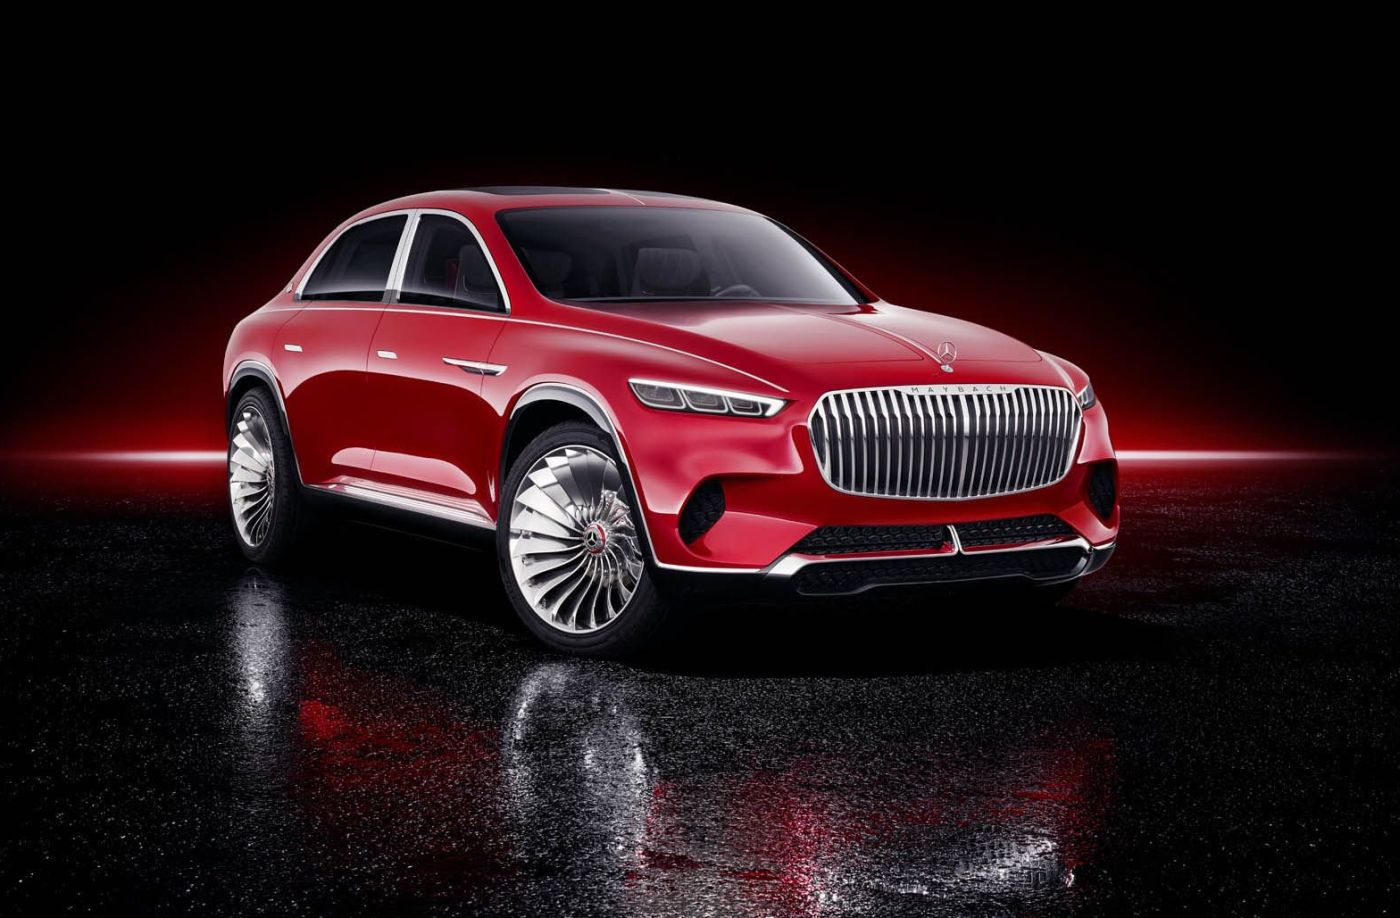 Vision-Mercedes-Maybach-Ultimate-Luxury-01